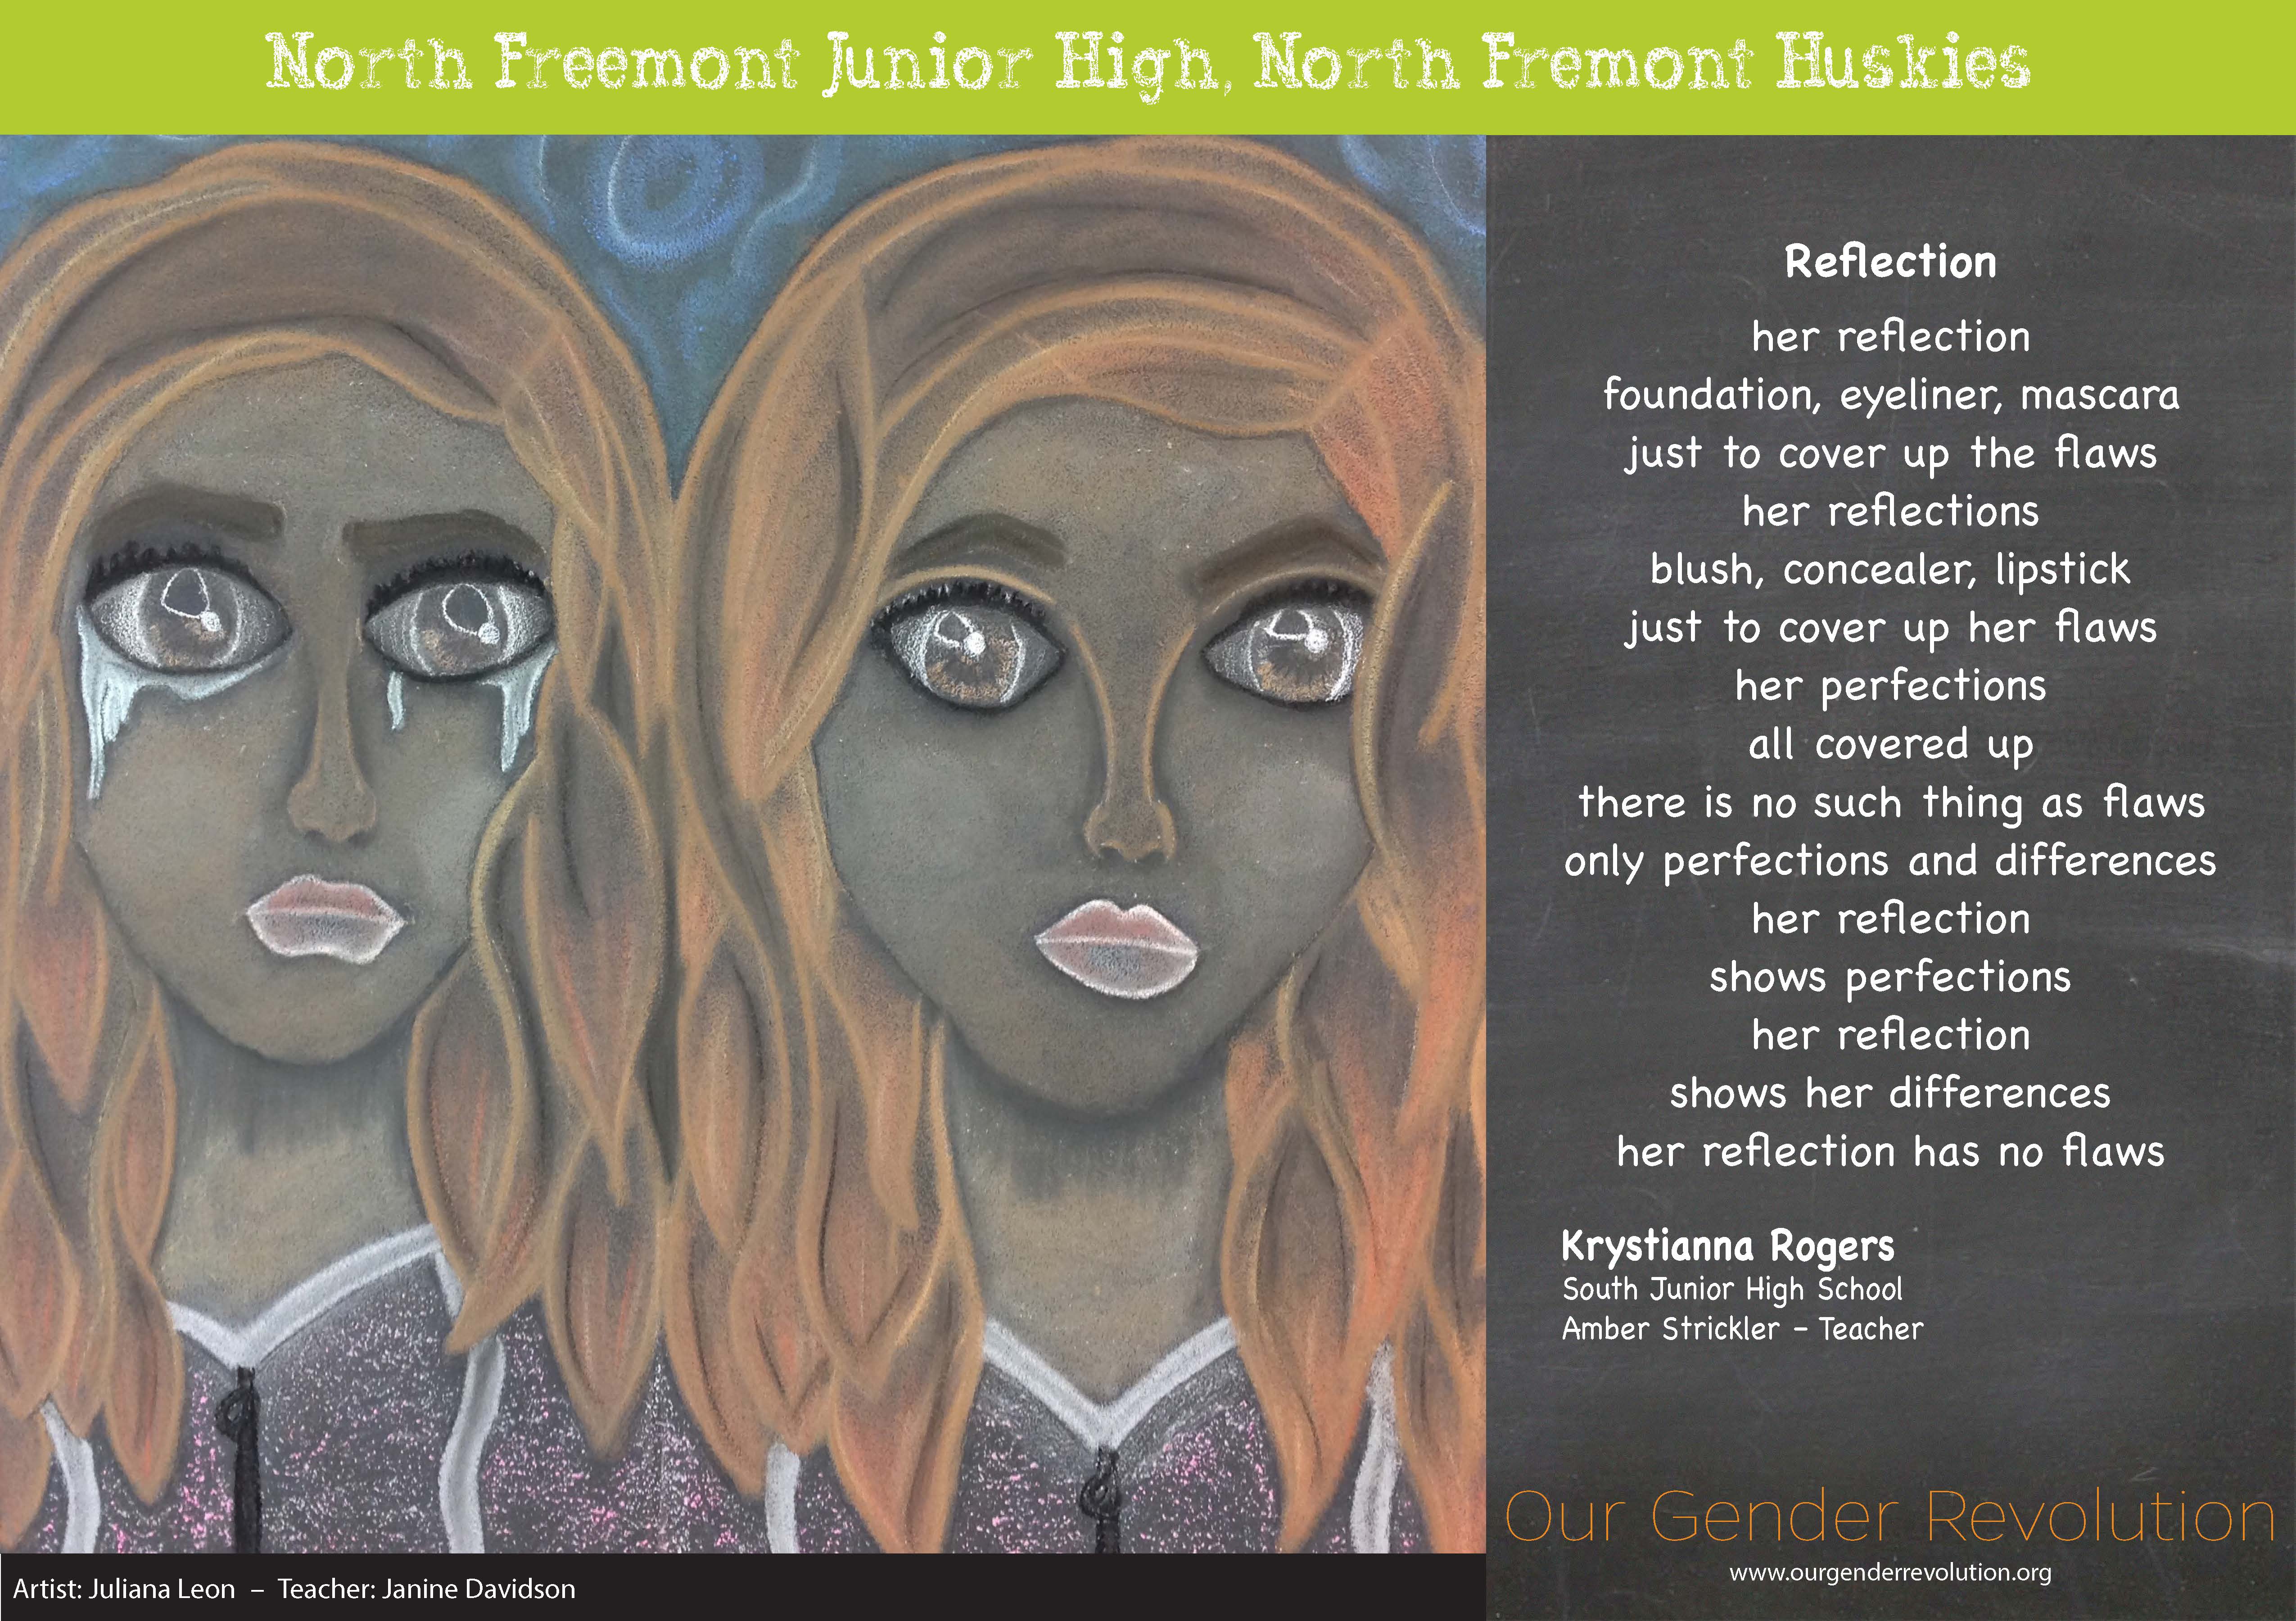 North Freemont Junior High - Reflection by Krystianna Rogers